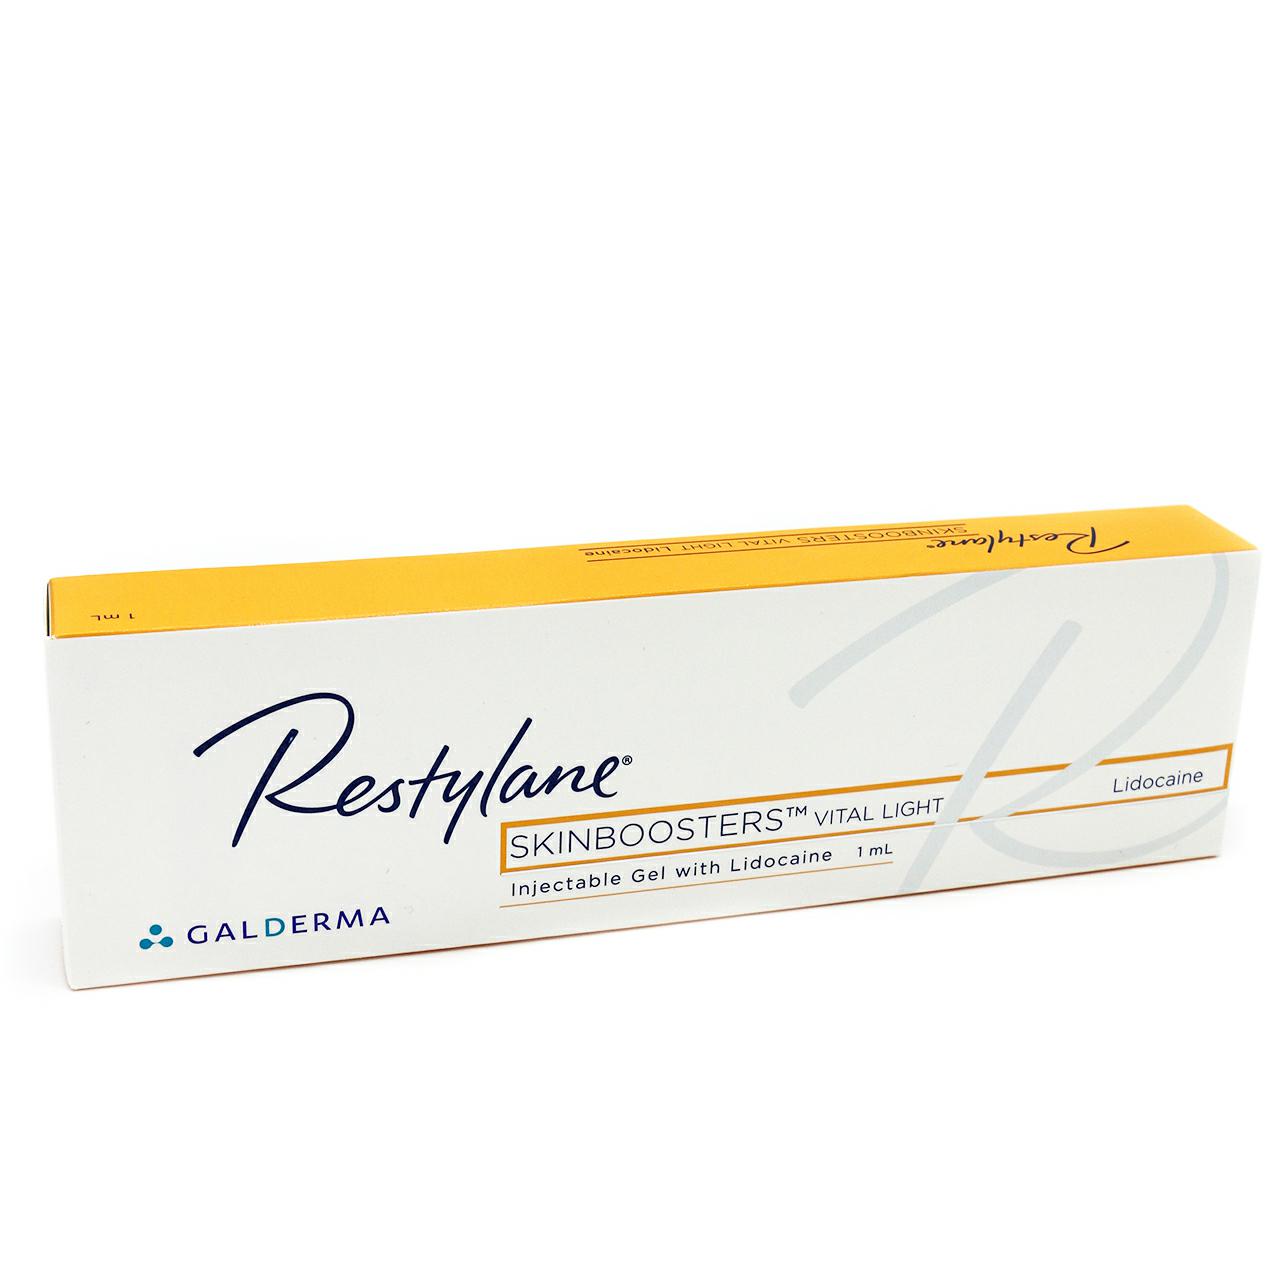 <p style="text-align:center"><strong><span style="font-size:24px"><span style="color:#000000">RESTYLANE VITAL LIDOCAINE</span></span></strong></p>
